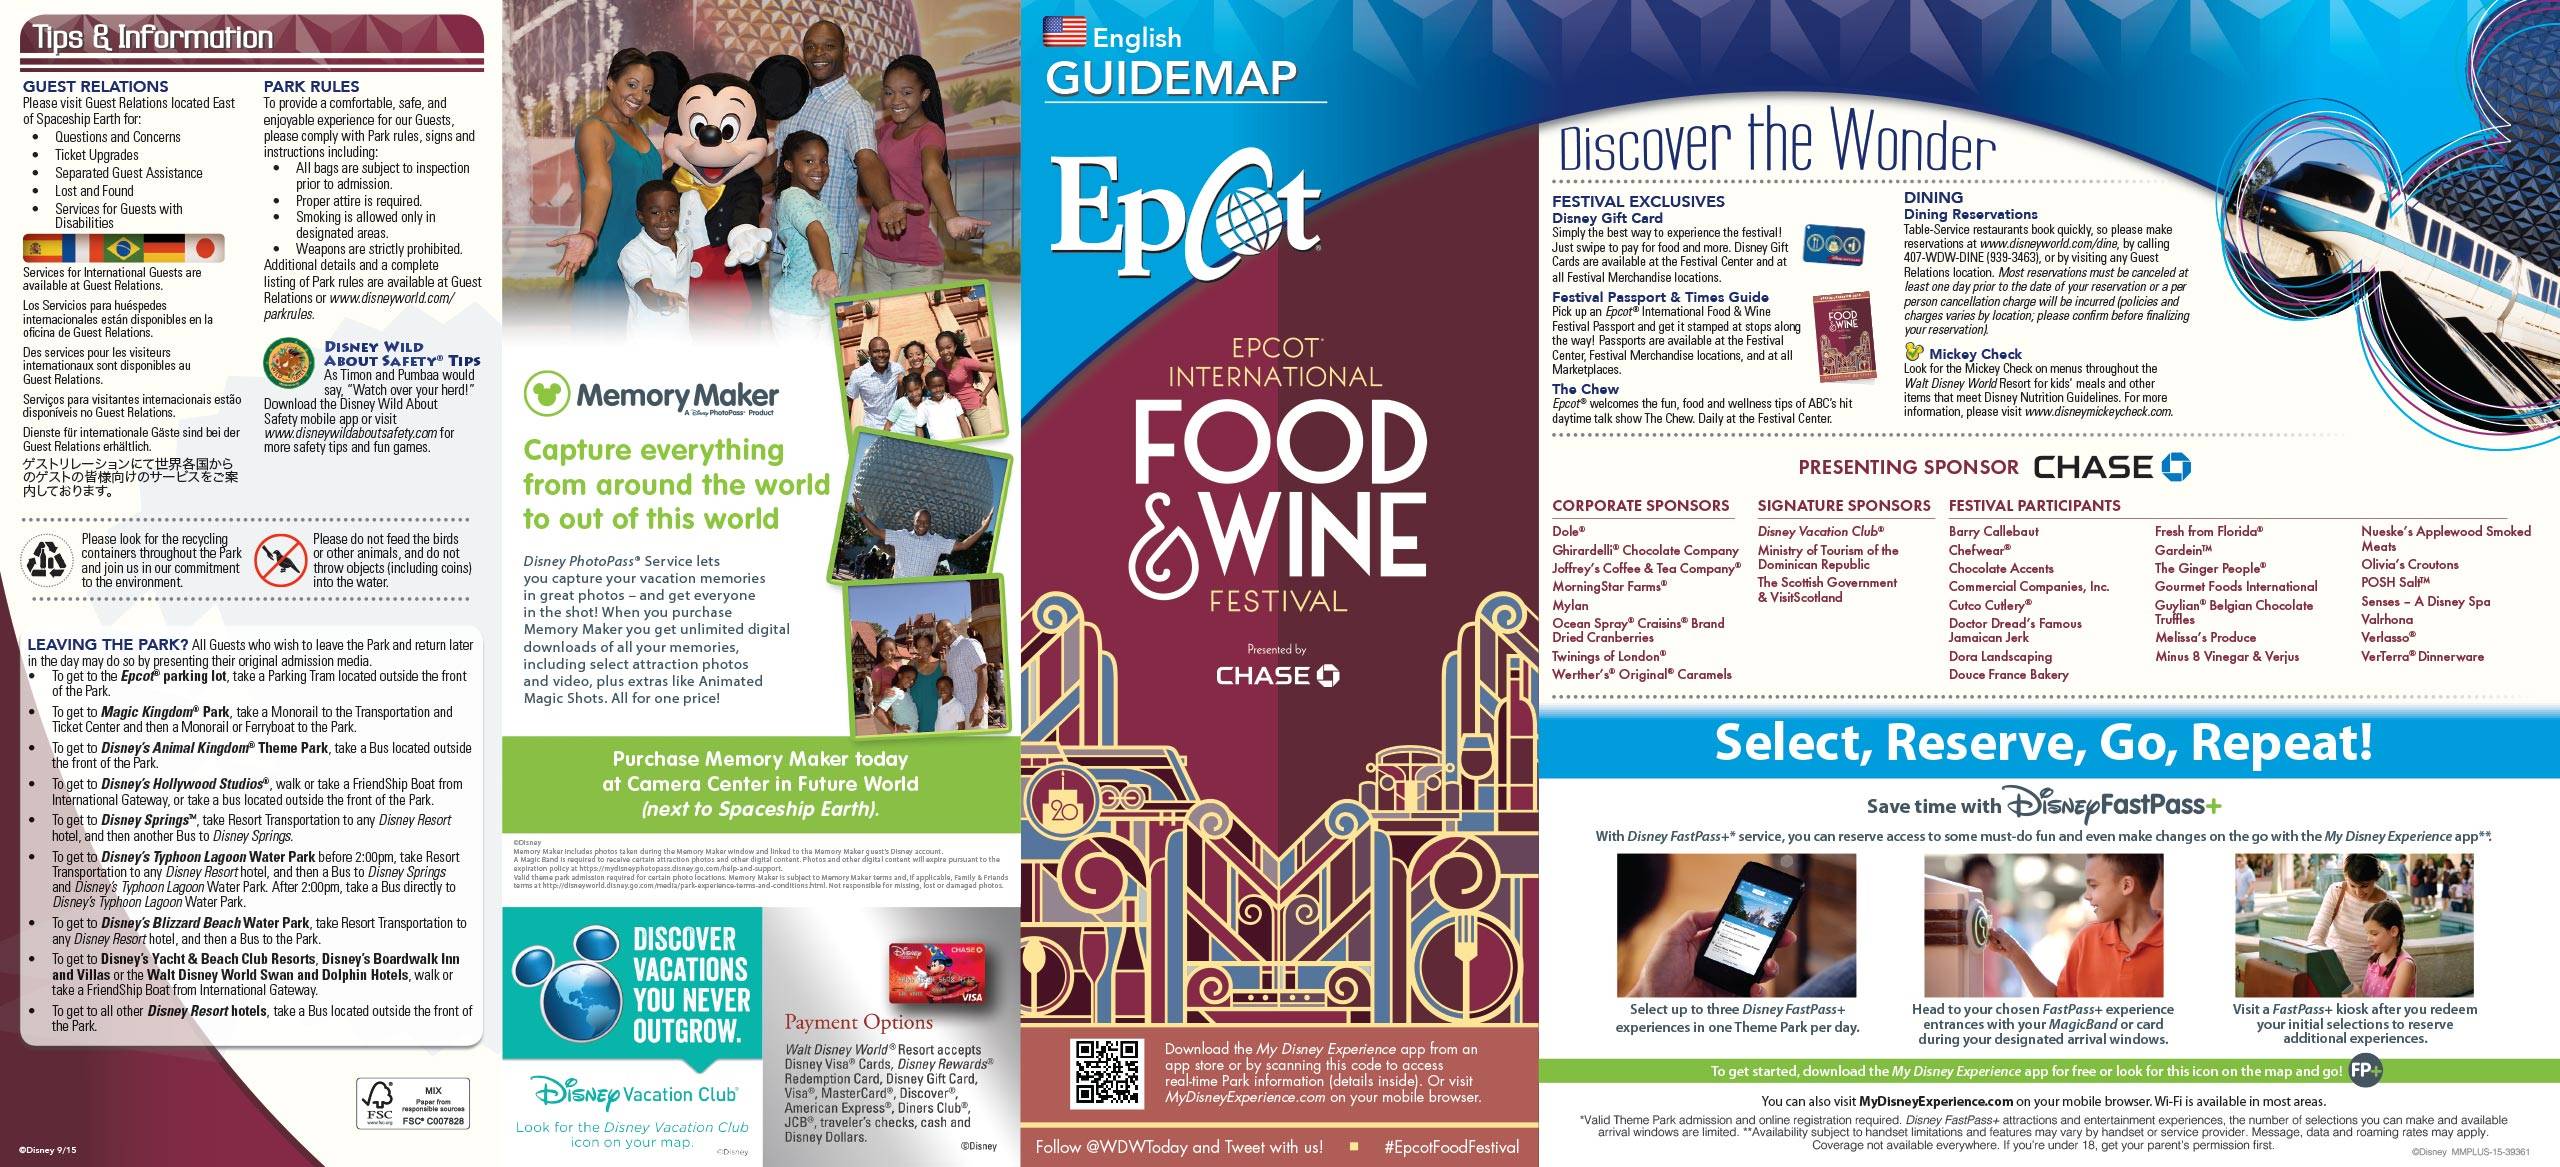 2015 Epcot International Food and Wine Festival Guide Map - Front